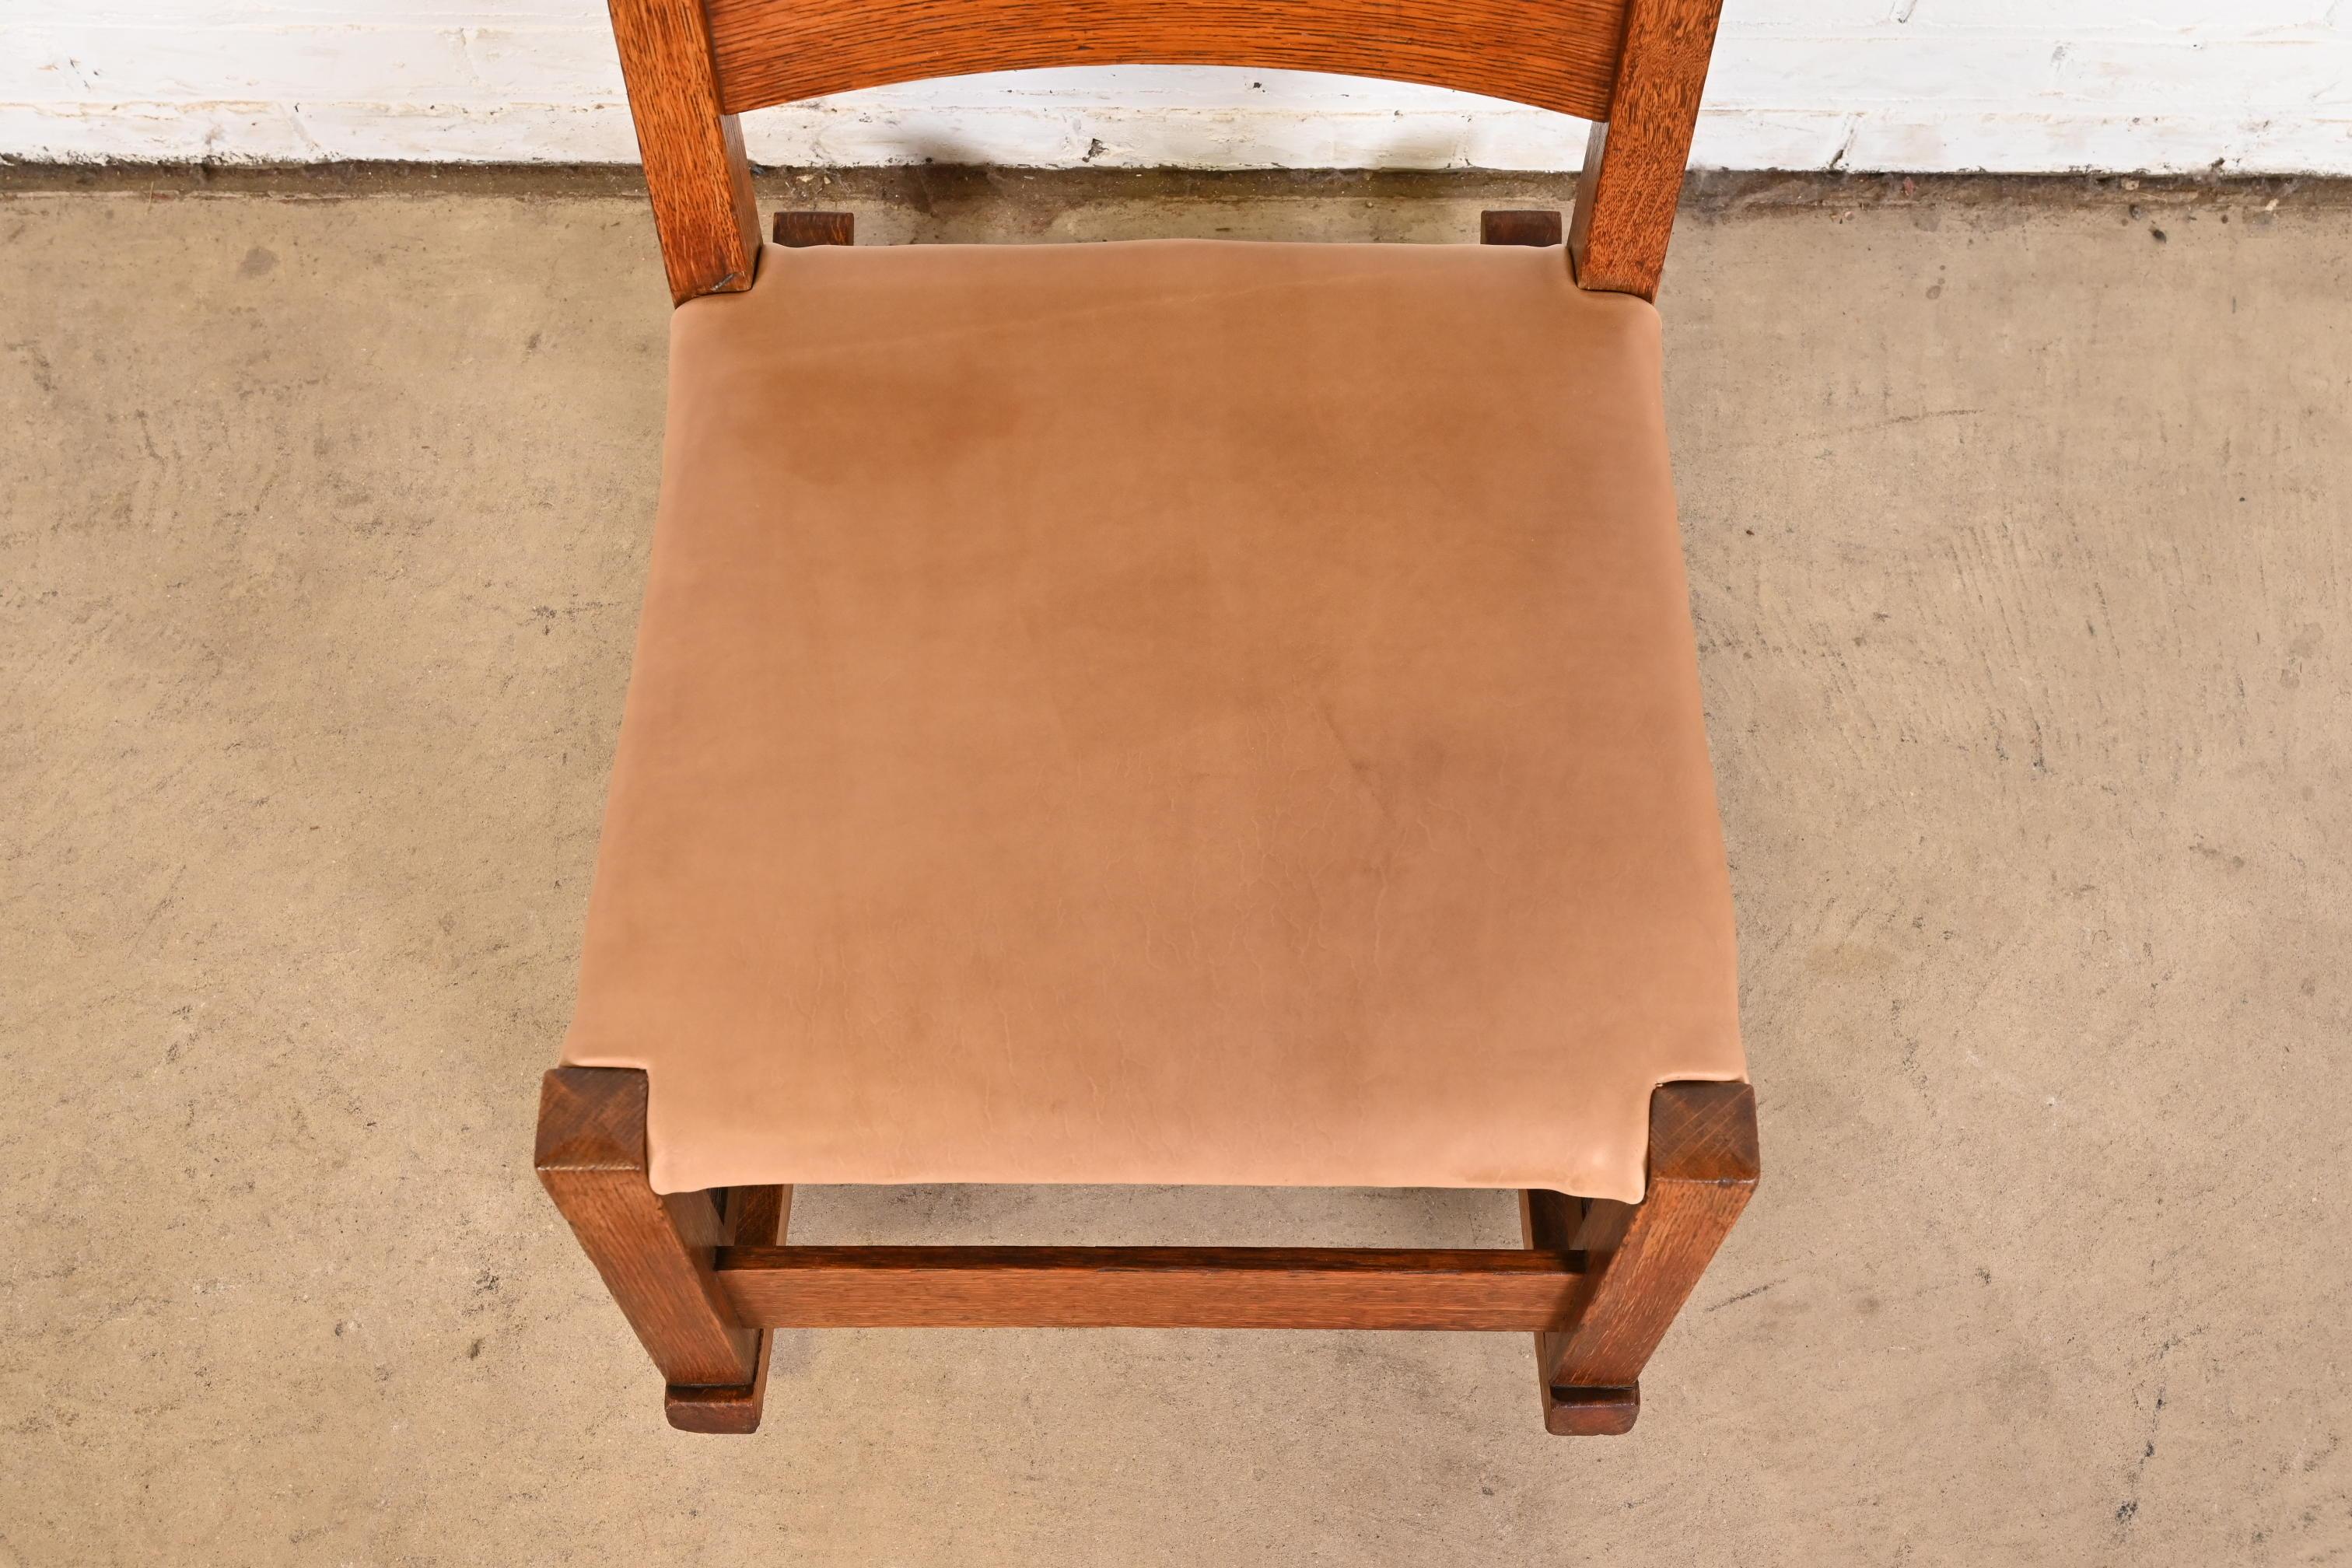 20th Century Gustav Stickley Mission Oak Arts & Crafts Sewing Rocking Chair, Circa 1900 For Sale